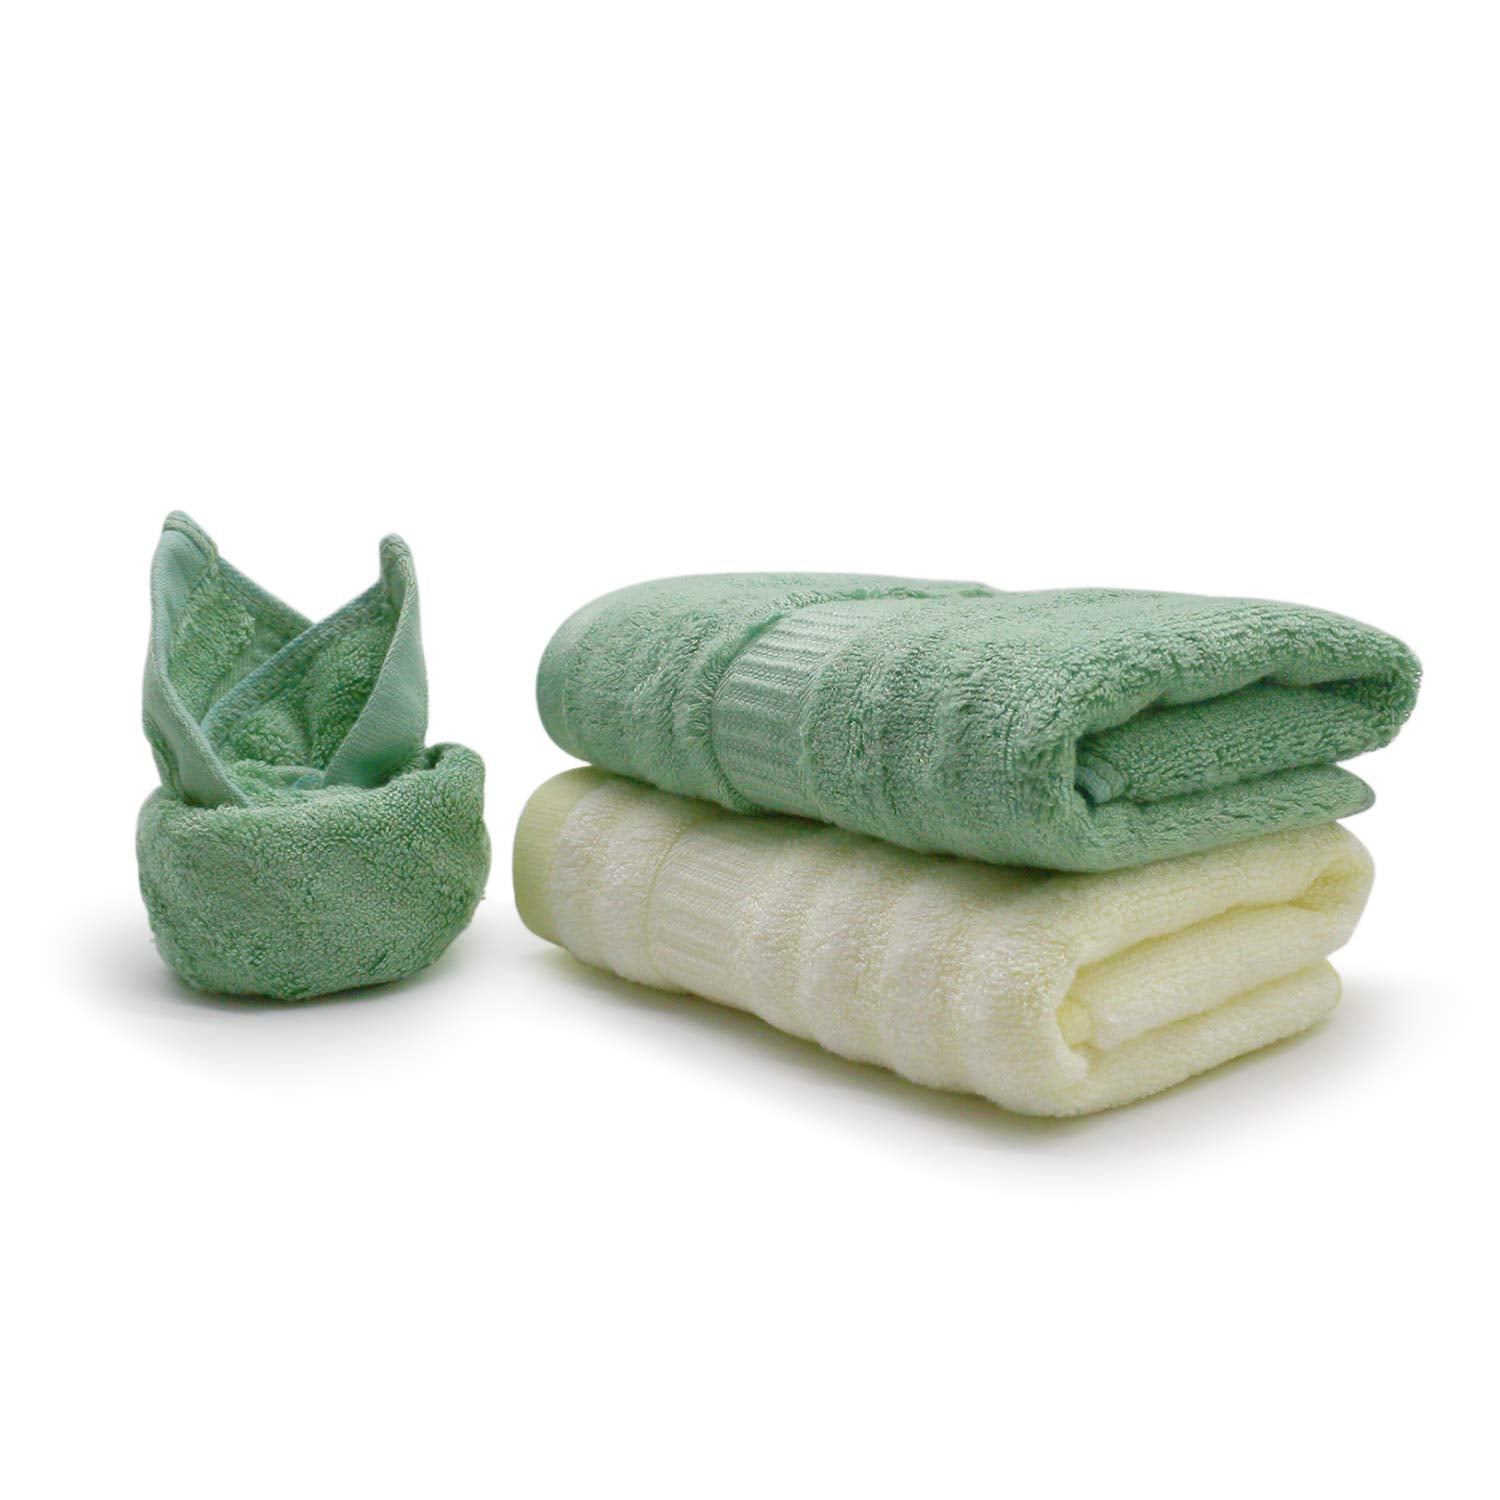 Mush Bamboo Hand Towel Set of 2 | 100% Bamboo | Ultra Soft, Absorbent & Quick Dry Towel for Daily use. Gym, Pool, Travel, Sports and Yoga | 75 X 35 cms | 600 GSM (Cream & Green)